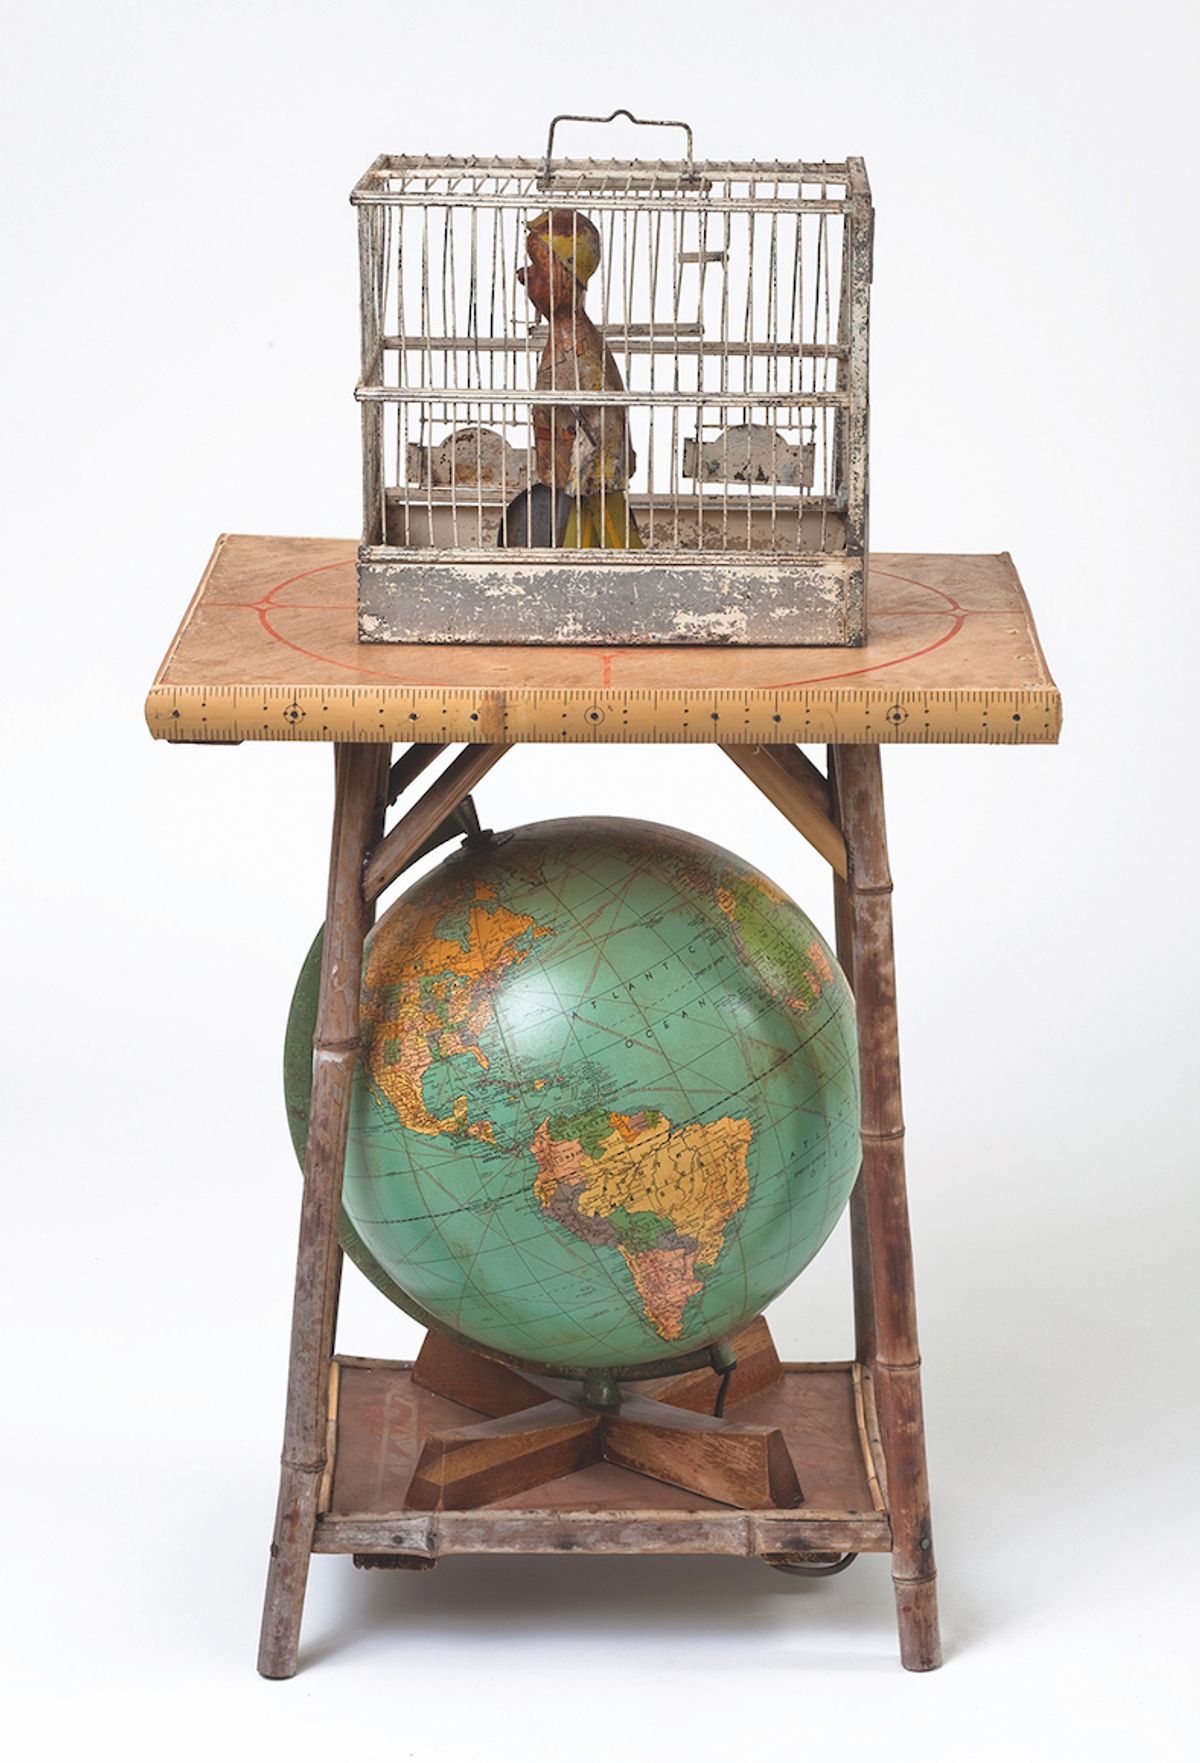 Betye Saar’s assemblage Globe Trotter (2007), with a doll in a birdcage above a globe in reference to the slave trade
Courtesy of Betye Saar and Roberts Projects, Los Angeles. Photo: Brian Forrest
